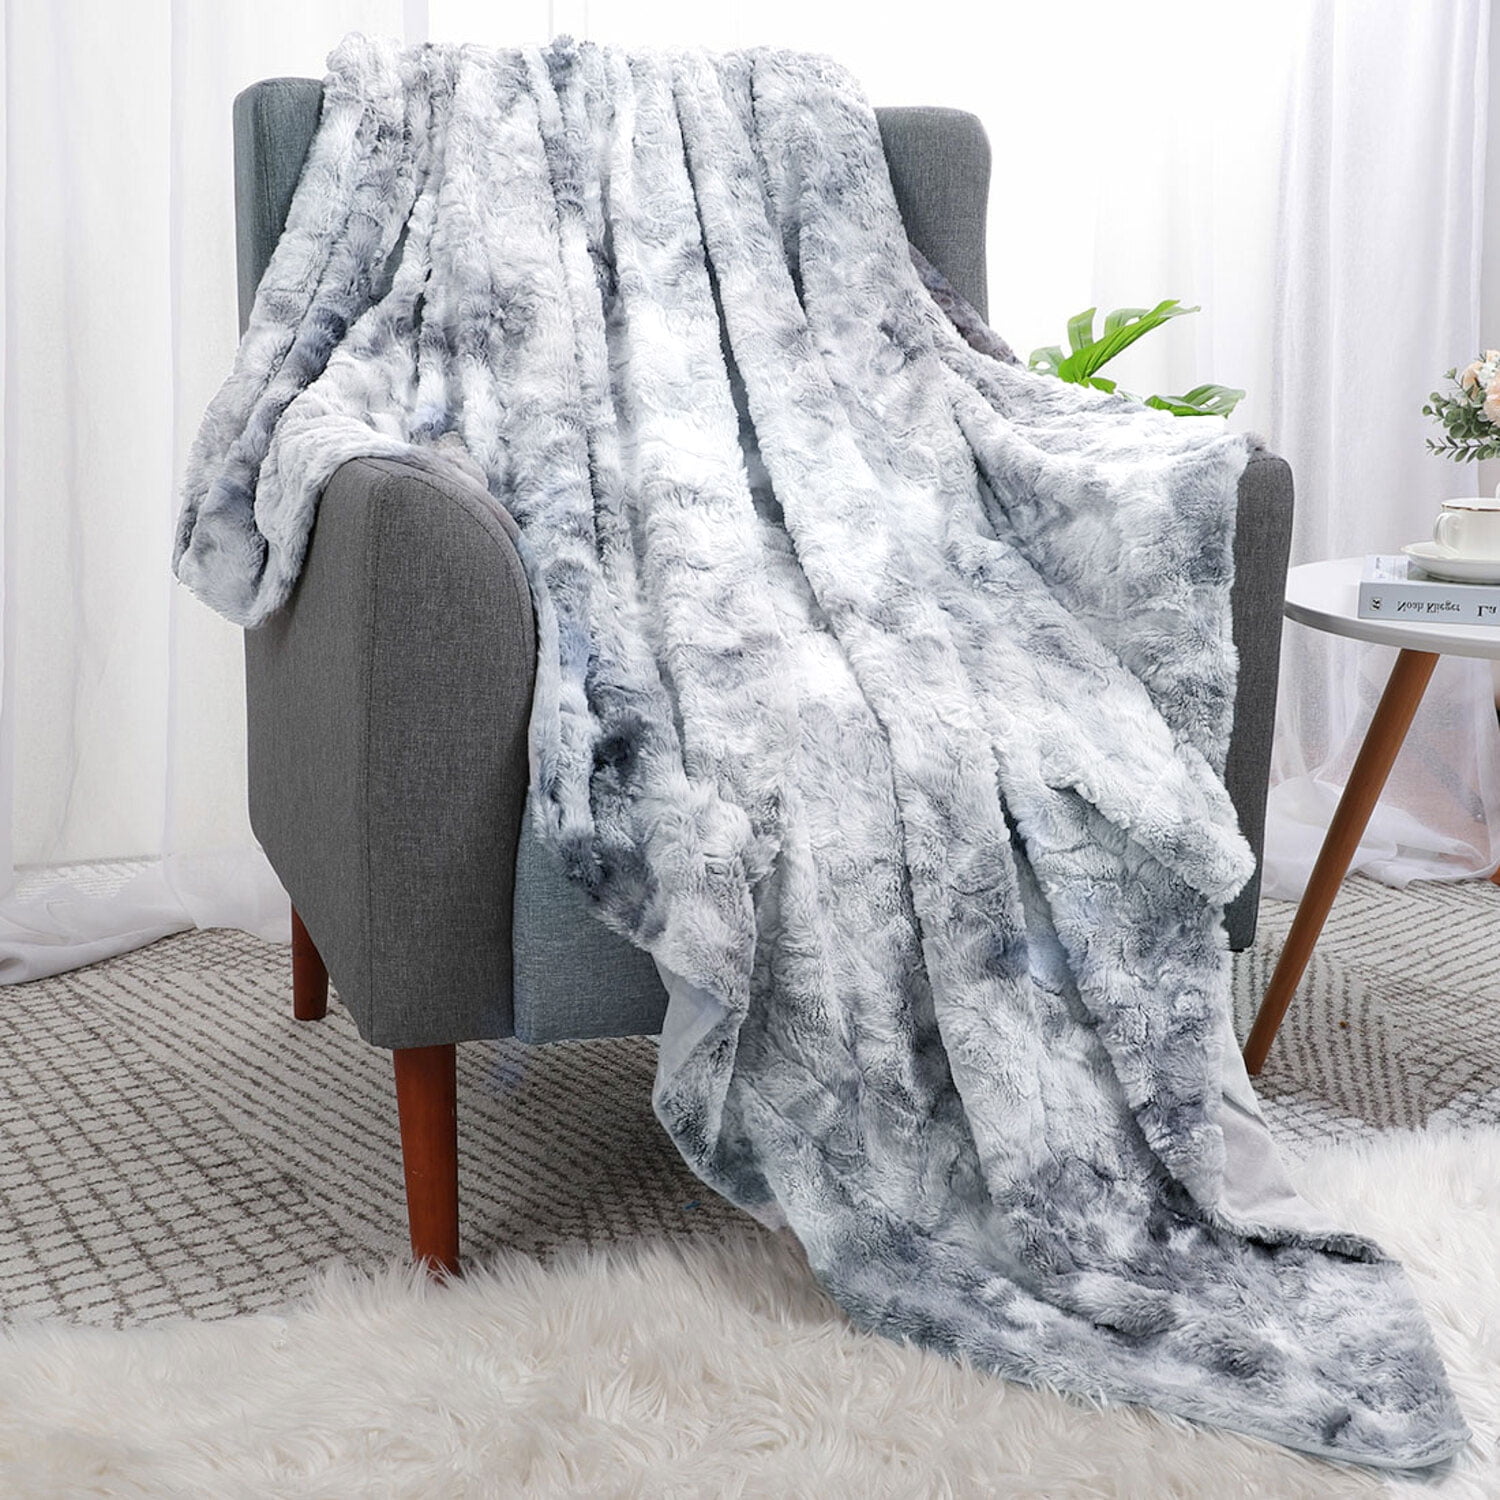 50x60 inches Super Soft Microfiber Fluffy Cozy Plush Faux Fur Blanket for Bed Sofa Living Room Decor Two Black Kitten Throw Blanket for Couch 